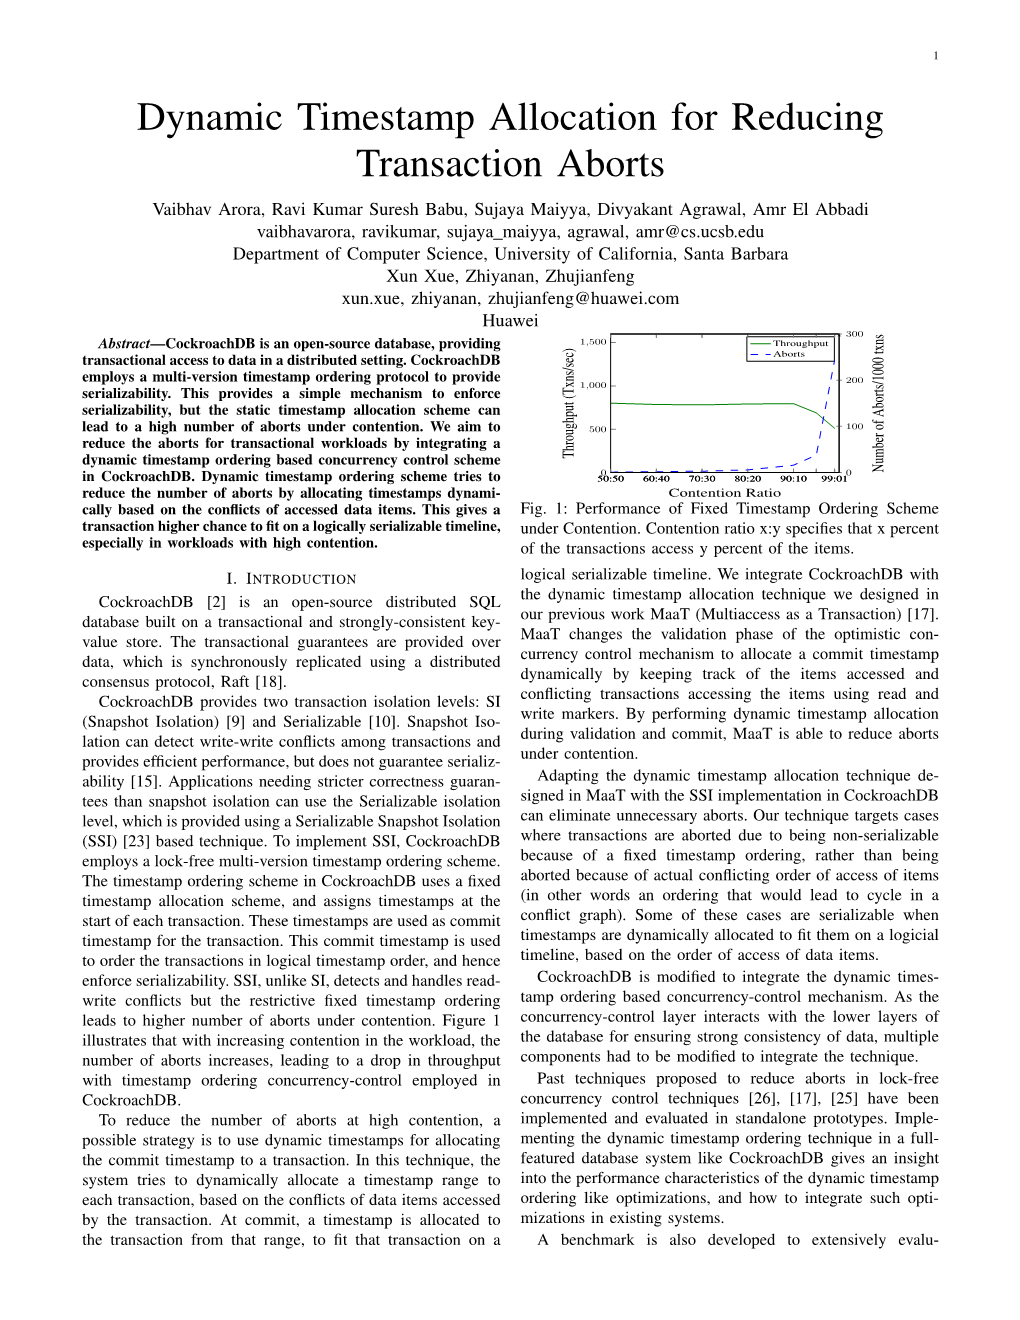 Dynamic Timestamp Allocation for Reducing Transaction Aborts